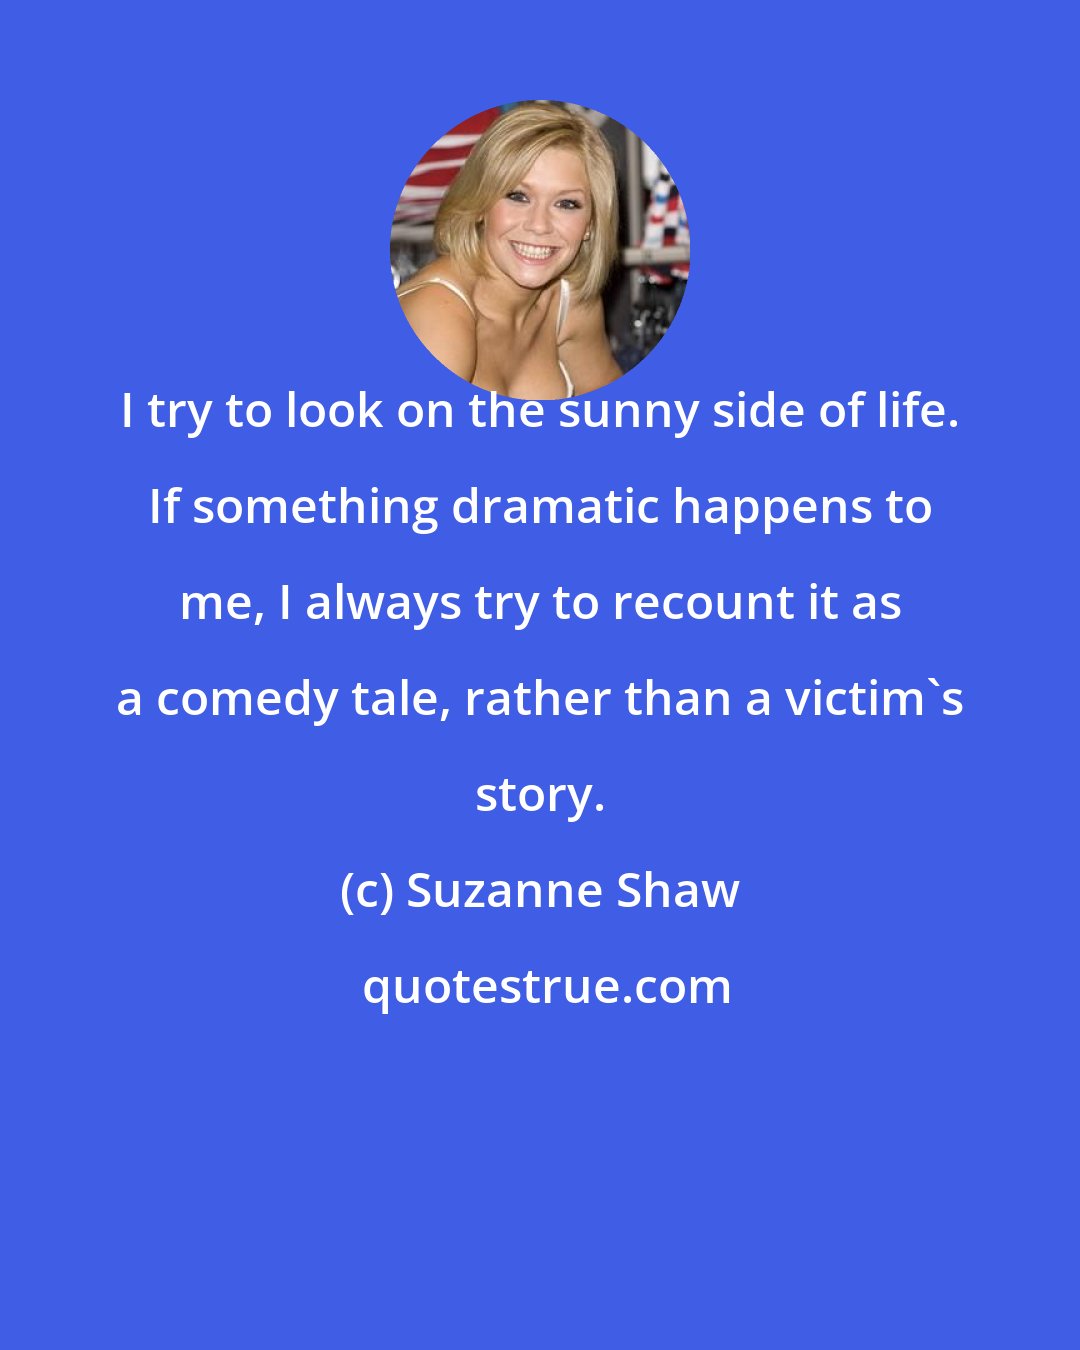 Suzanne Shaw: I try to look on the sunny side of life. If something dramatic happens to me, I always try to recount it as a comedy tale, rather than a victim's story.